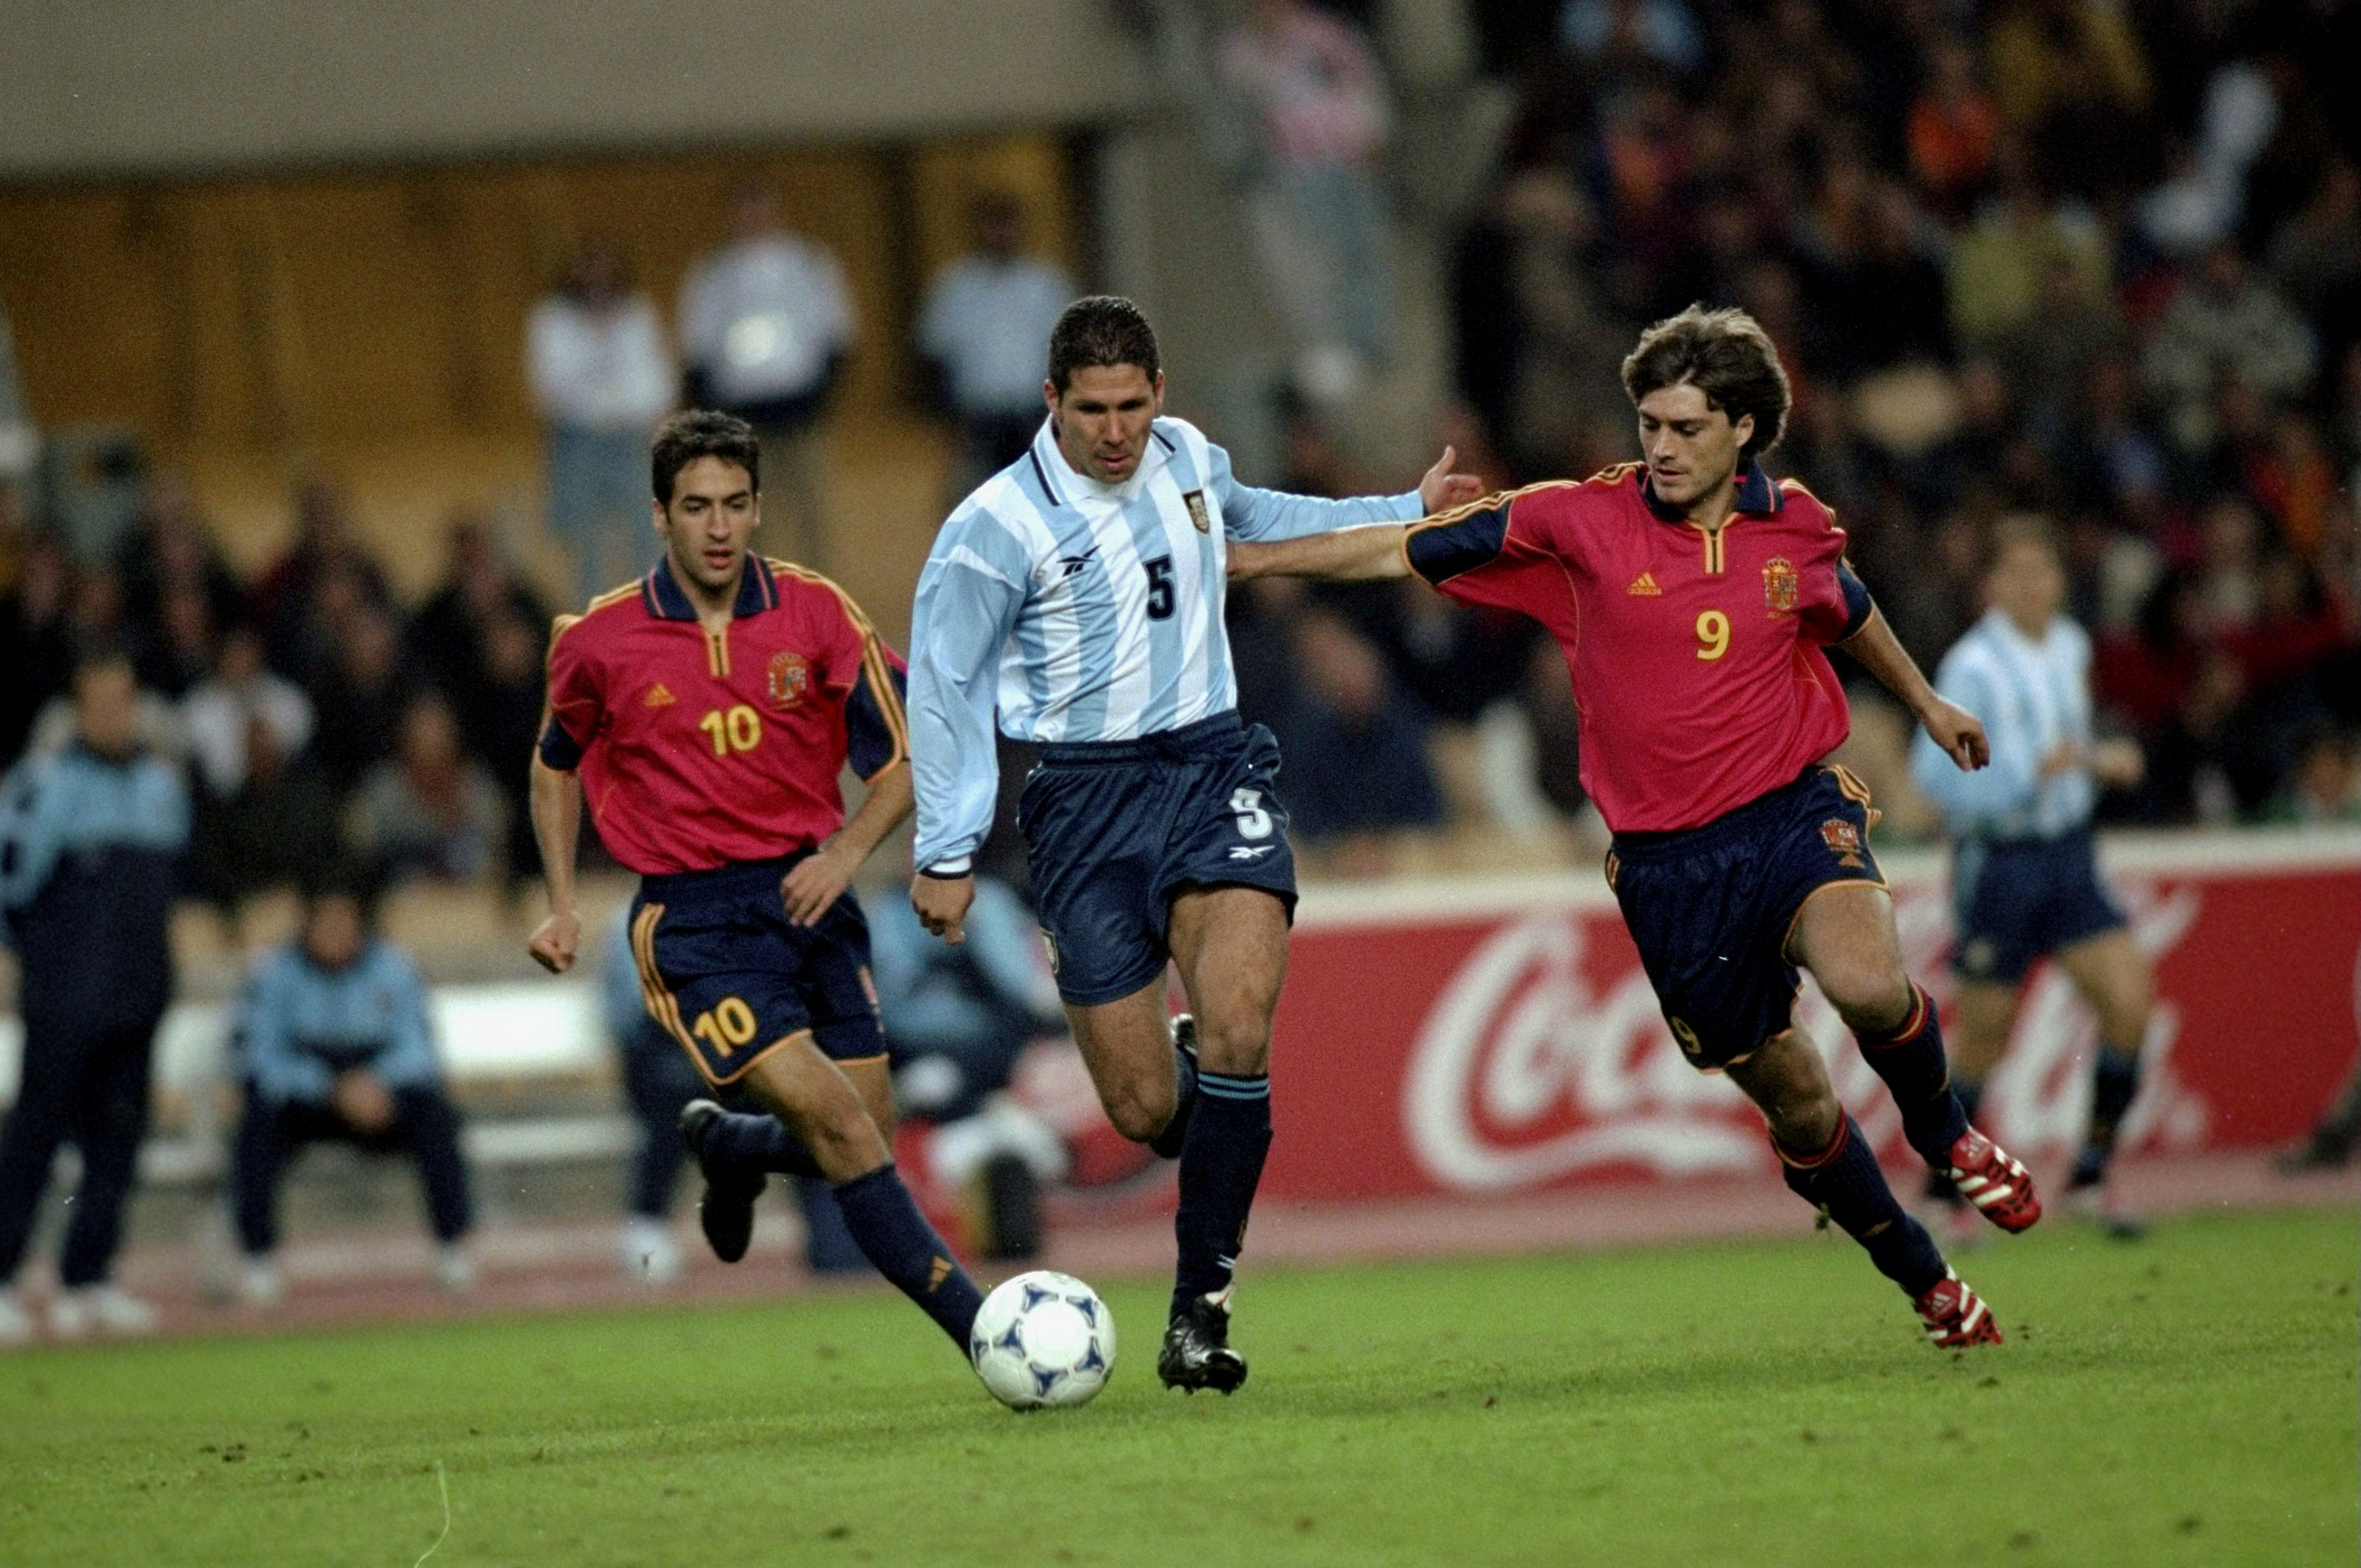 Julen Guerrero (right) competes for the ball with Diego Simeone in a friendly between Spain and Argentina in November 1999.